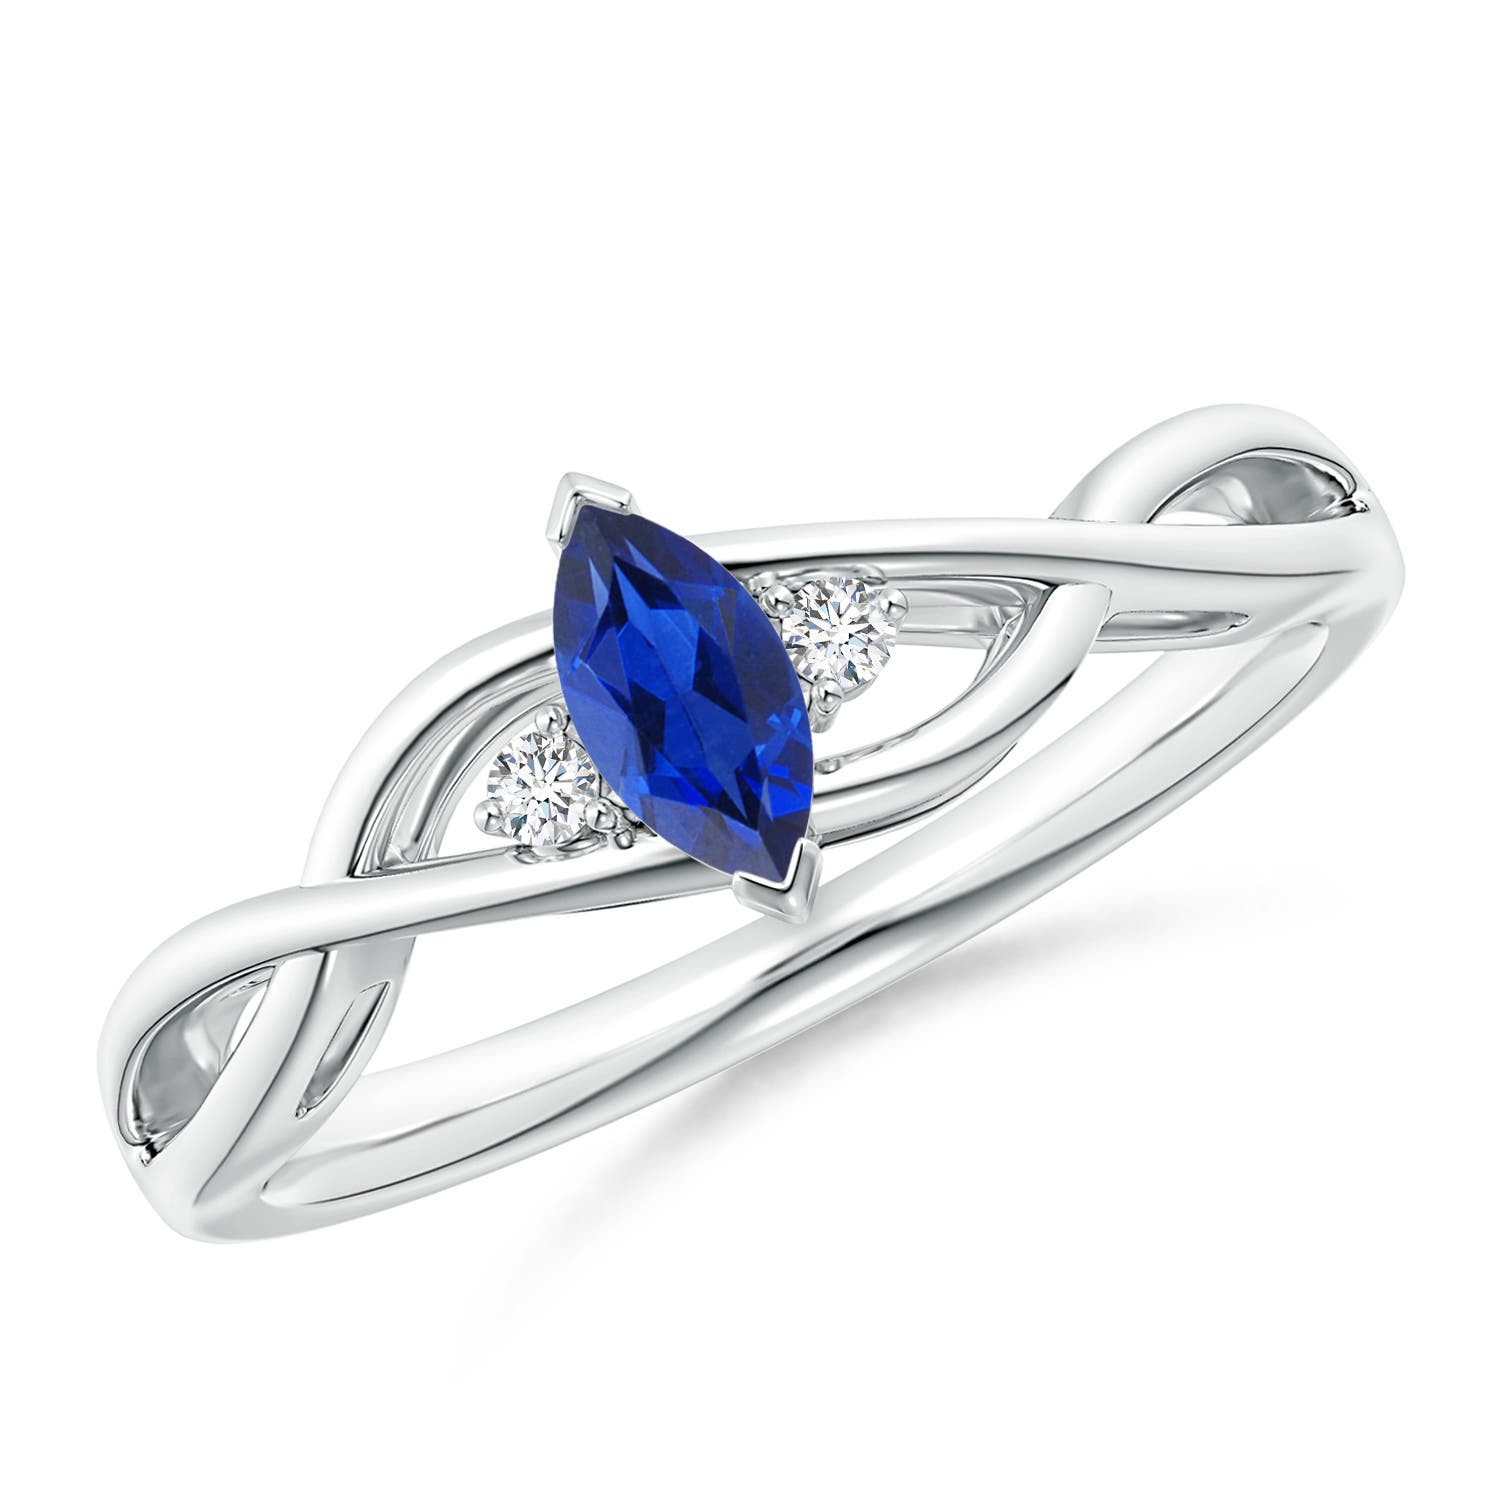 AAA - Blue Sapphire / 0.33 CT / 14 KT White Gold